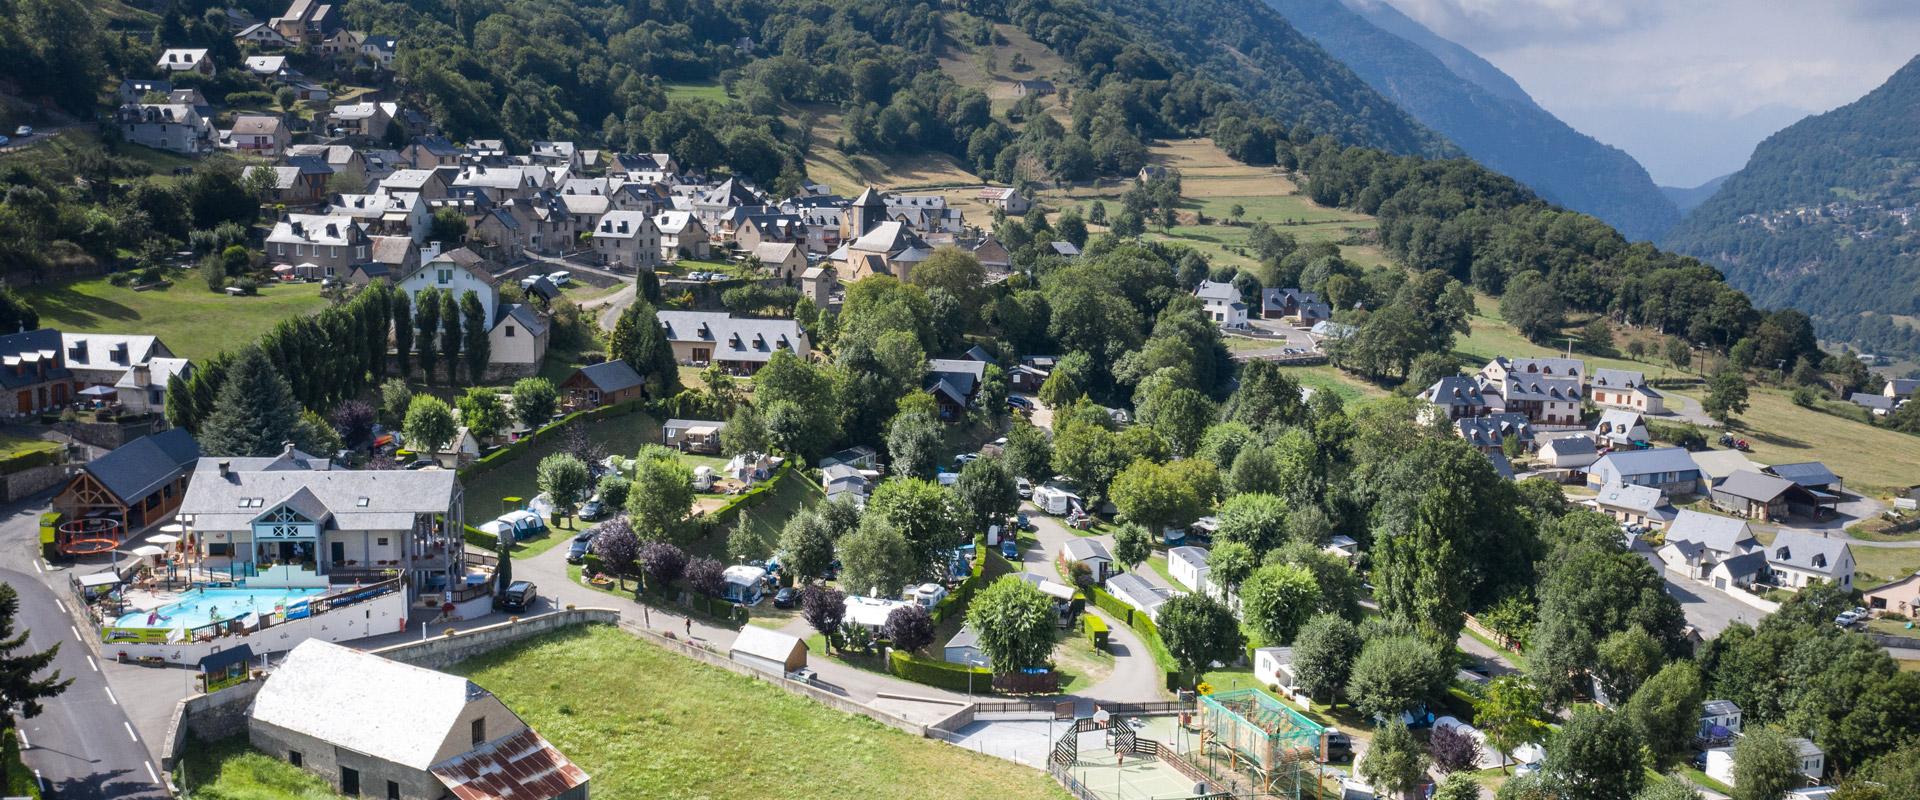 News about camping in the Hautes-Pyrénées